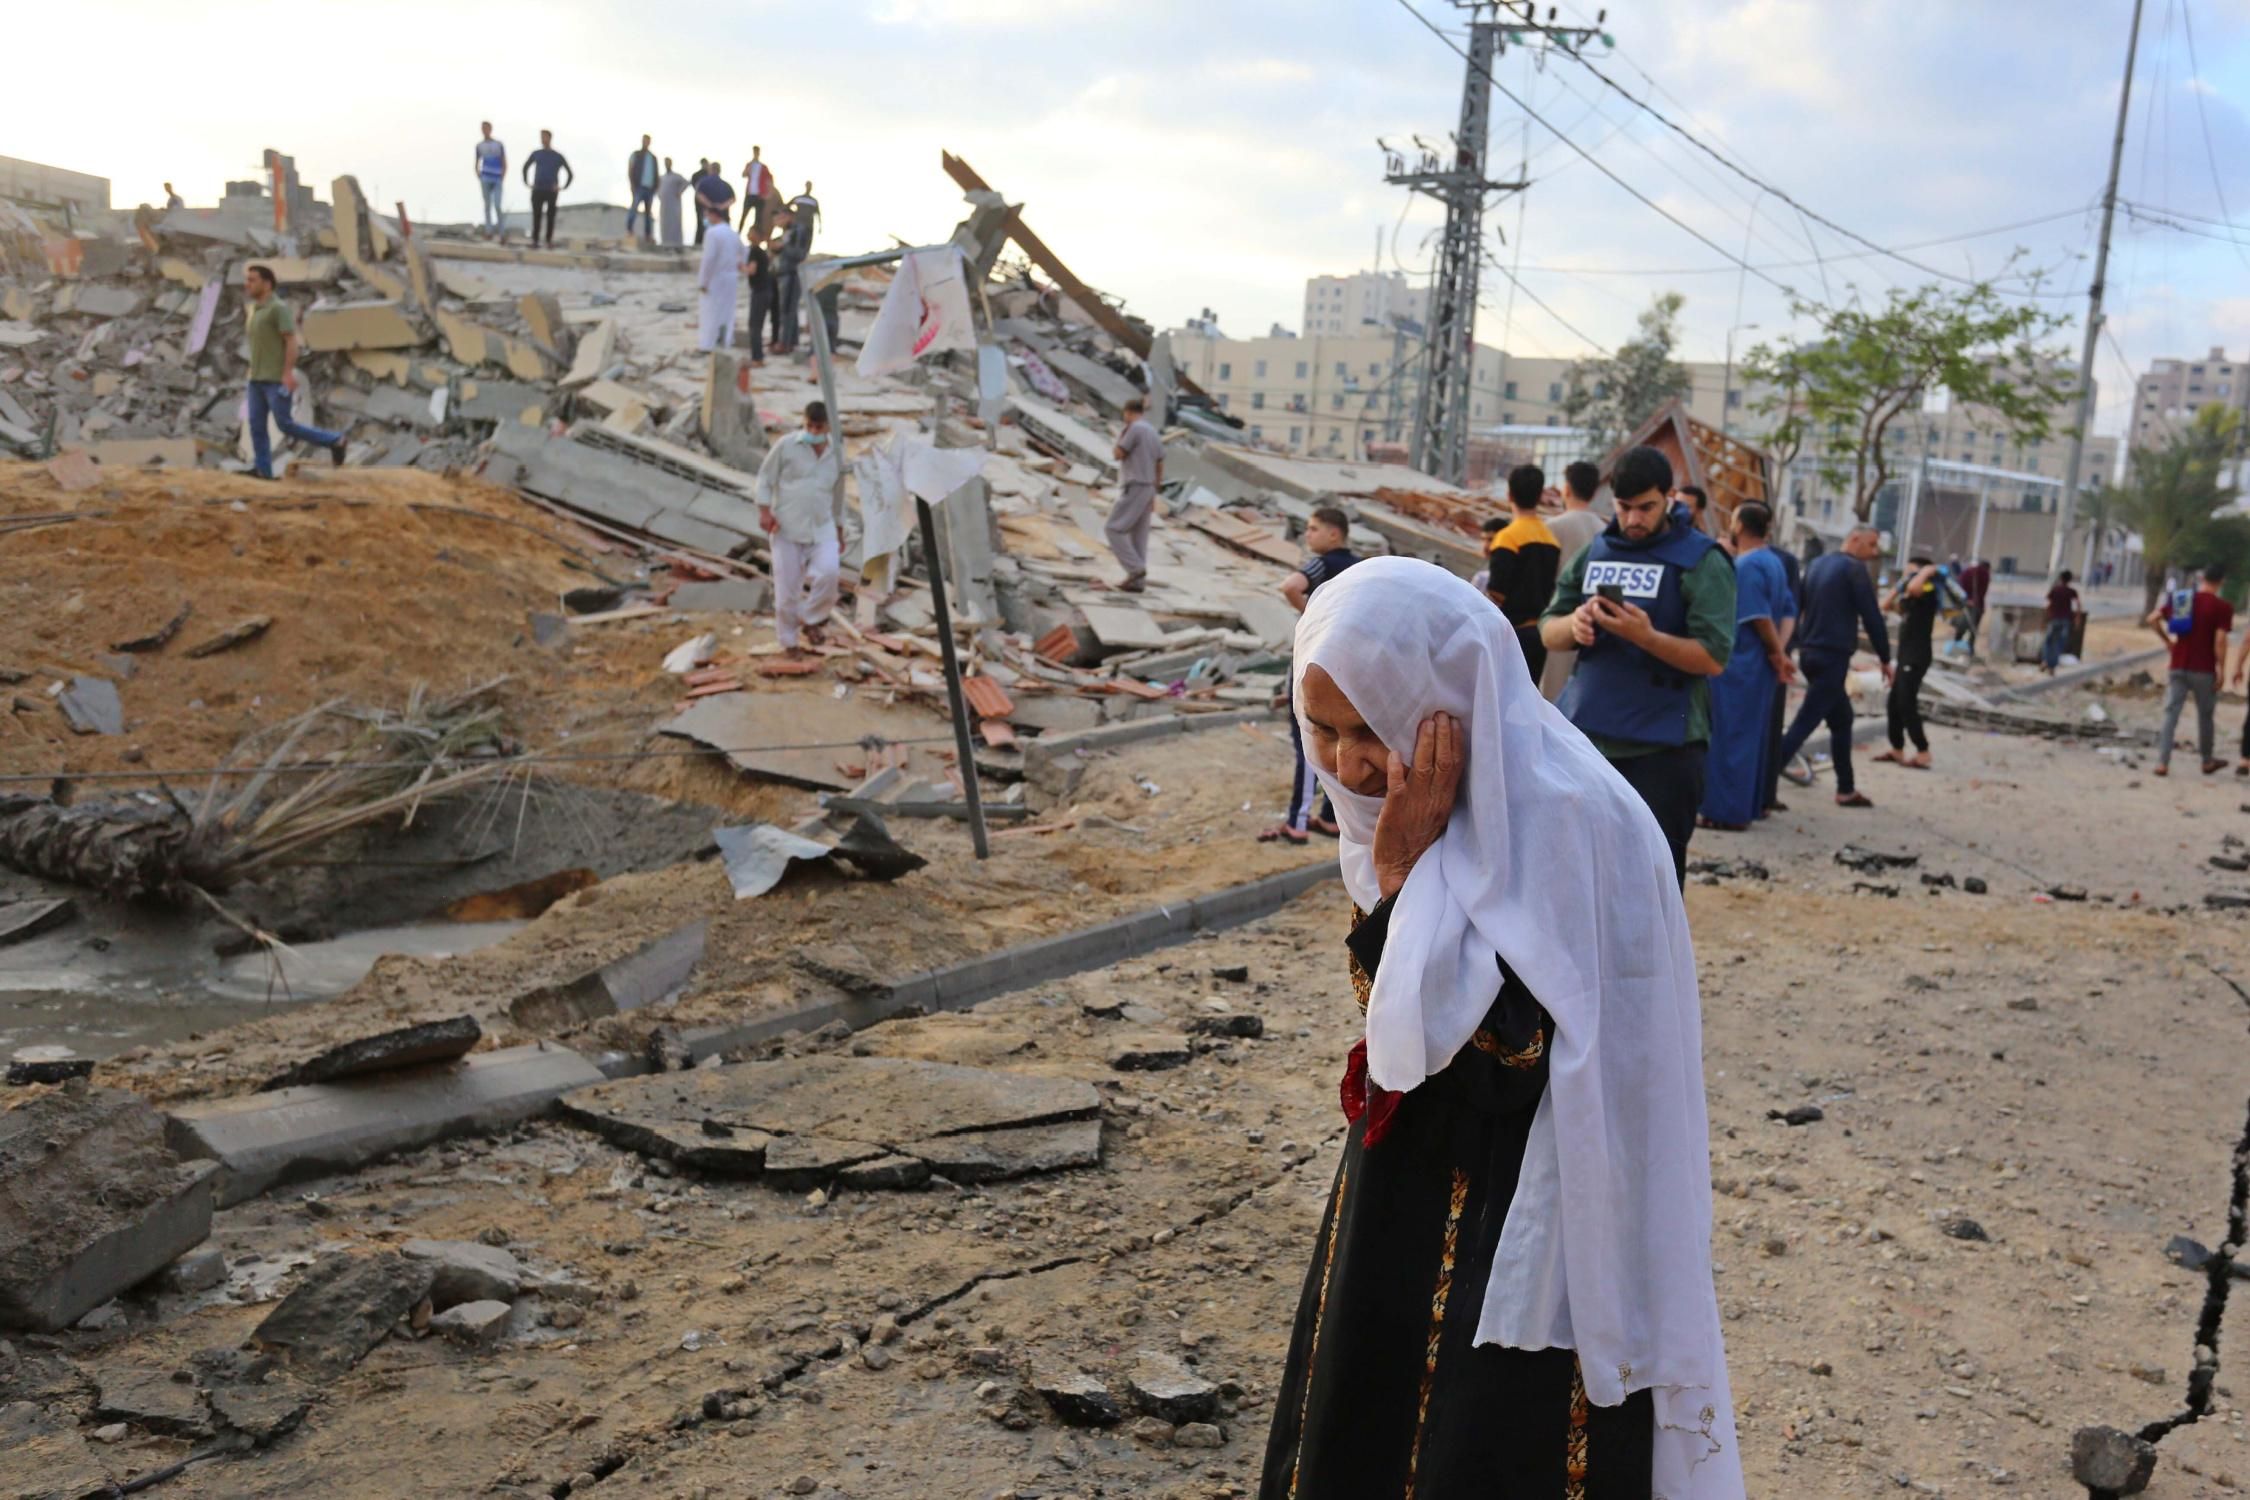 Palestinians stand near ruins of buildings destroyed by ongoing Israeli airsrtikes in Beit Lahia, Gaza on May 13, 2021.